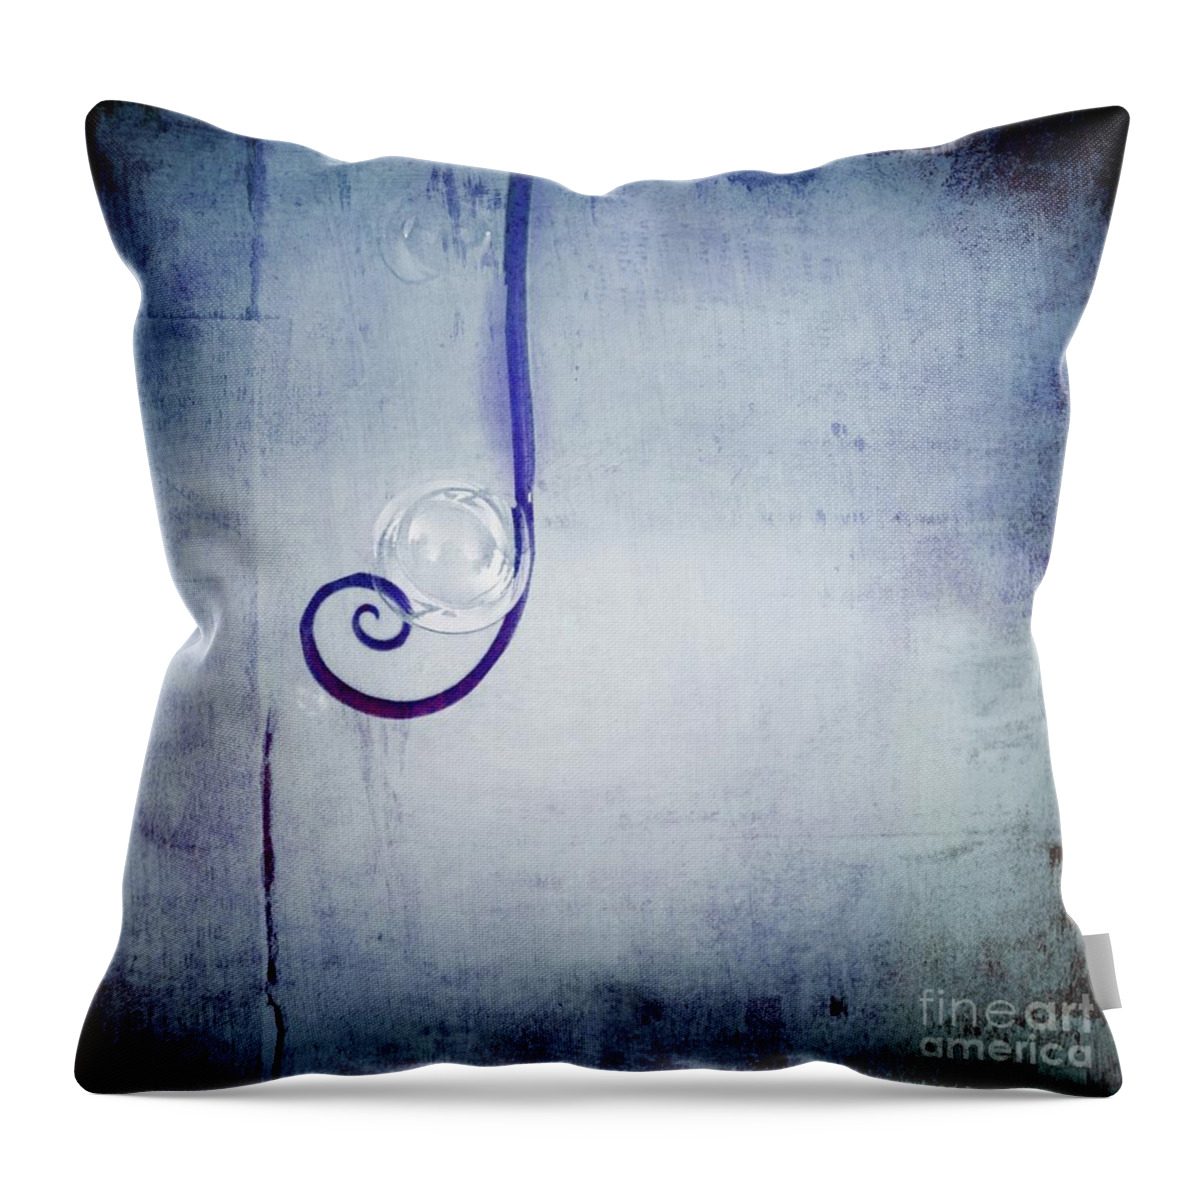 Blue Throw Pillow featuring the digital art Bubbling - 033a by Variance Collections